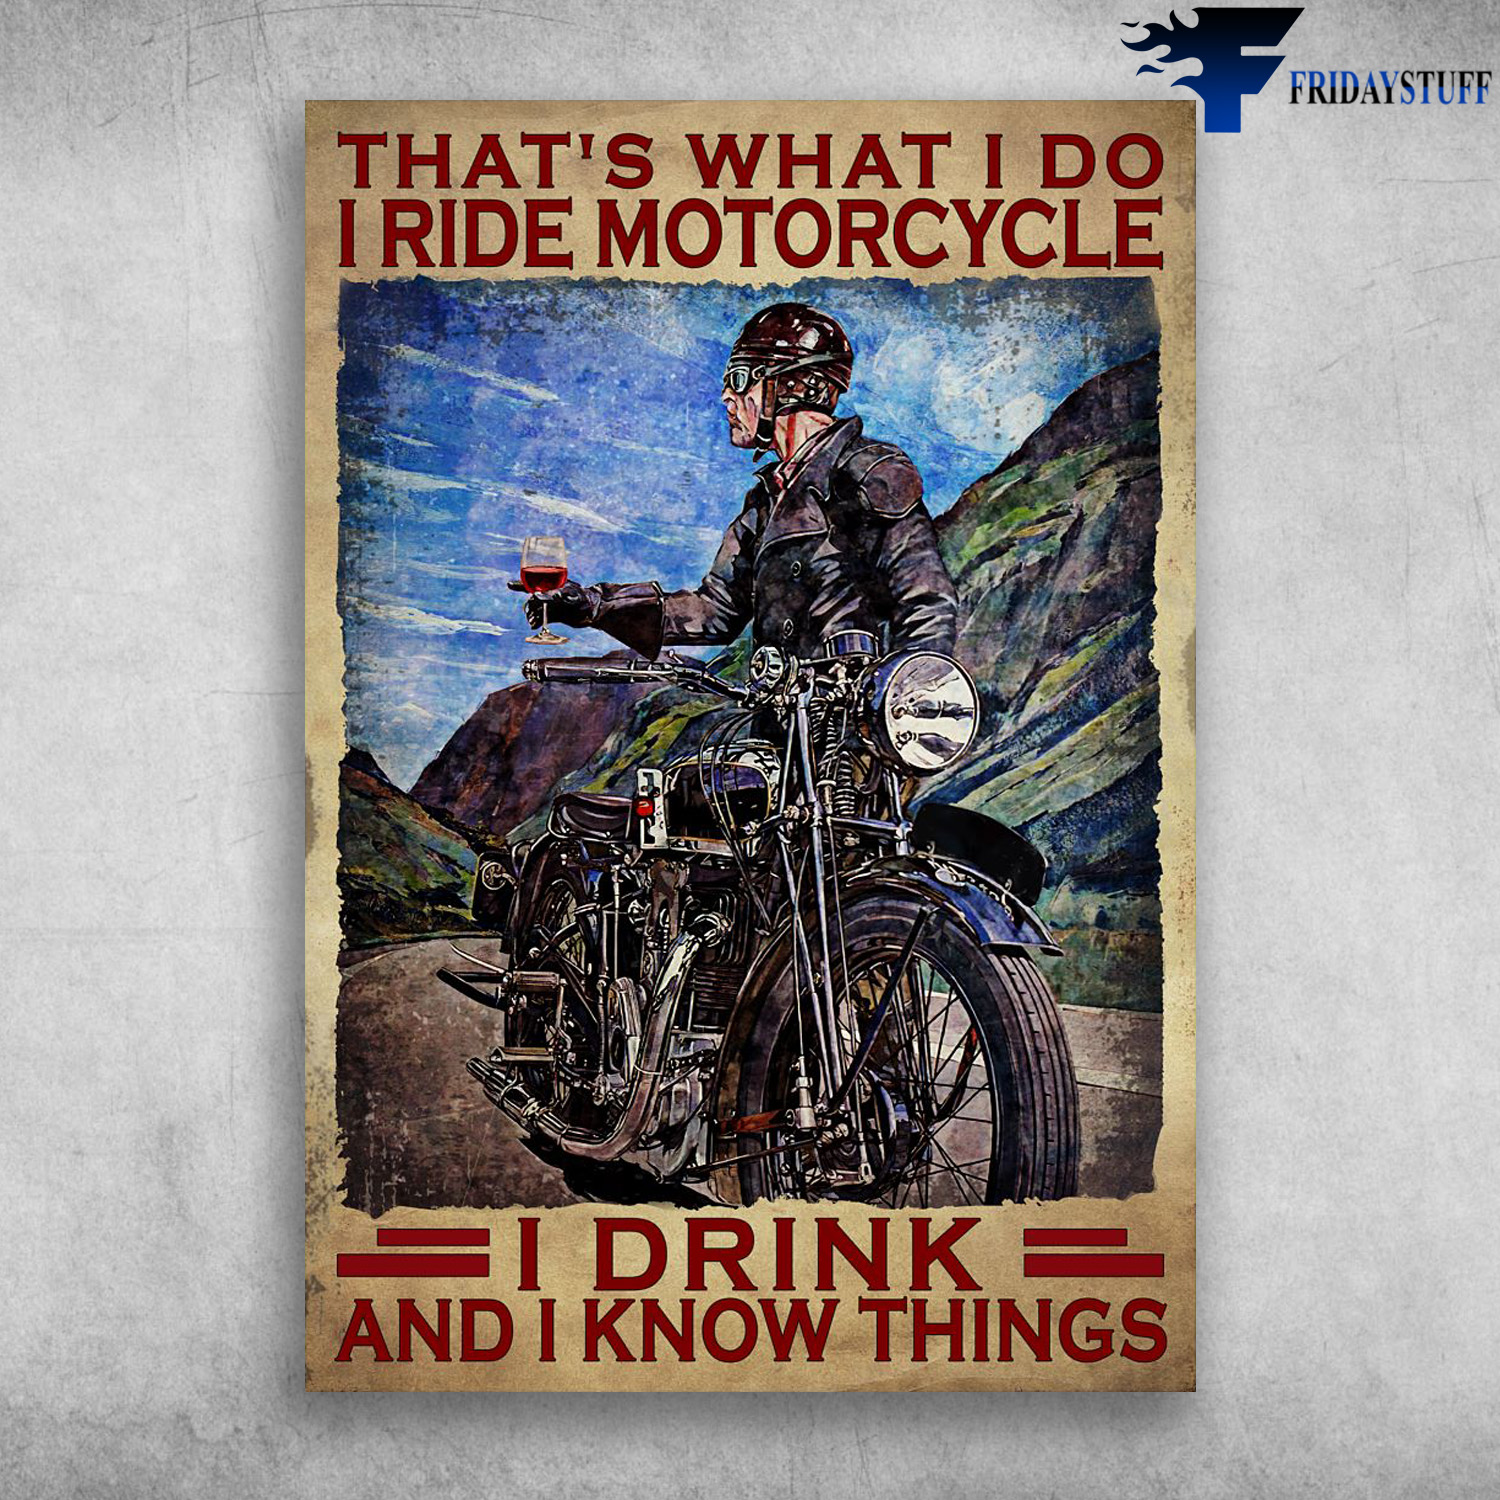 Motorcycling And Wine, Motorcycle Riders - That's What I Do, I Ride Motocycle, I Drink, And I Know Things